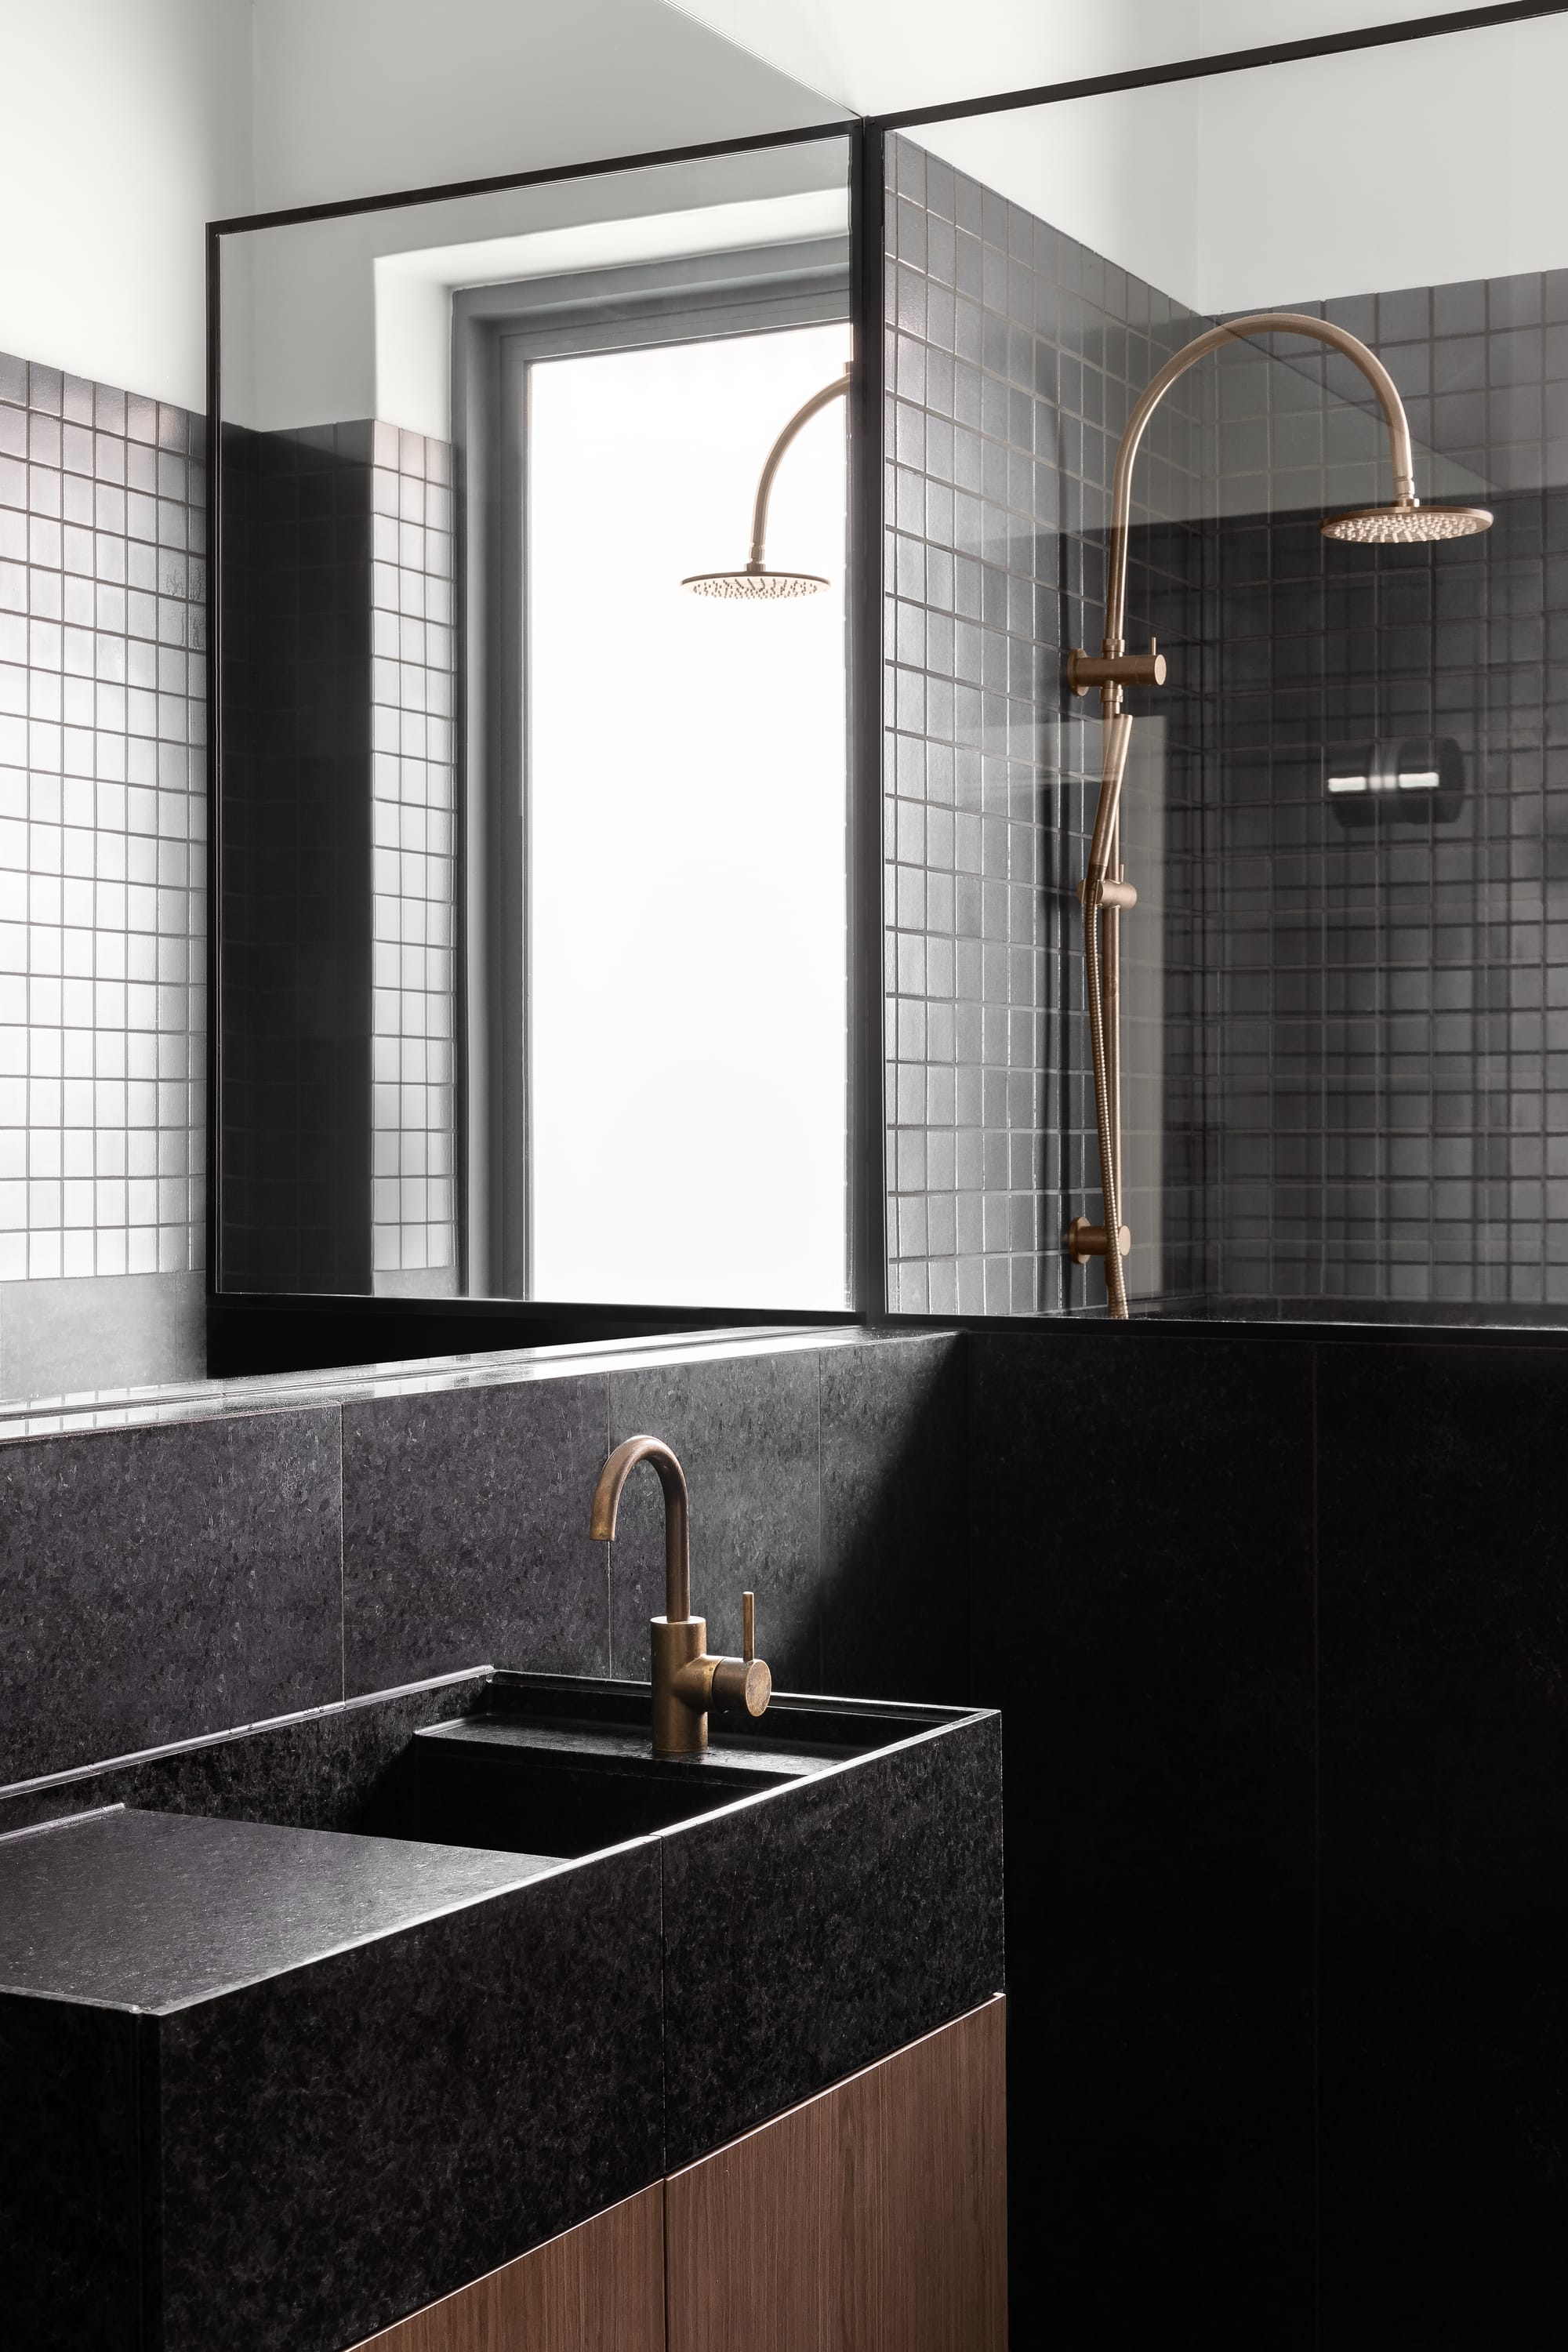 Rose Park by studio gram. Photography by Timothy Ross. Bathroom with black granite wall tiles, countertops and integrated sink. Wall mirror above sink. Bronze hardware. 